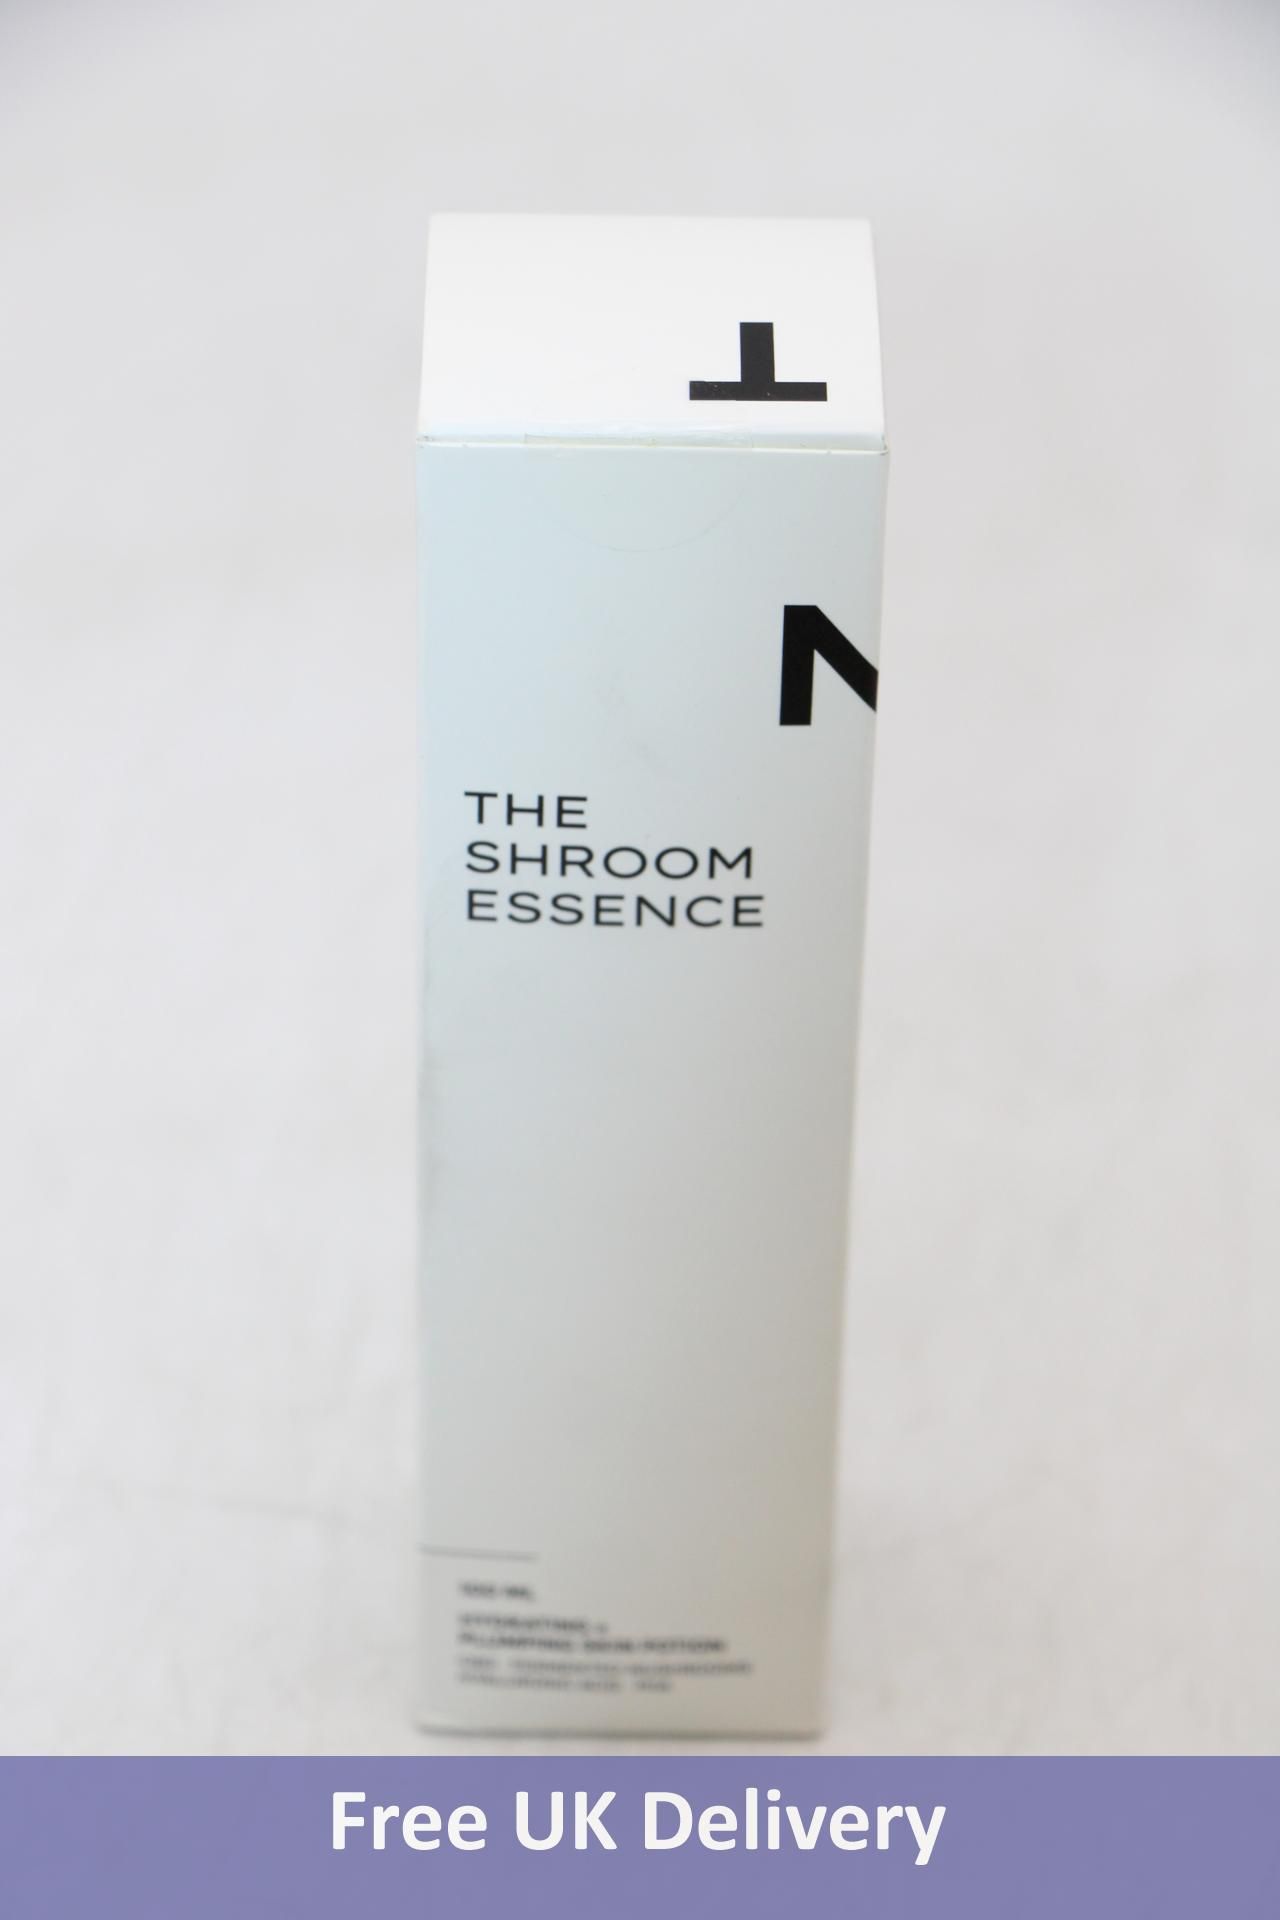 Seven Mantle The Shroom Essence Bottle Hydrating x Plumping Skin Potion Cbd, Size 100ml - Image 5 of 7